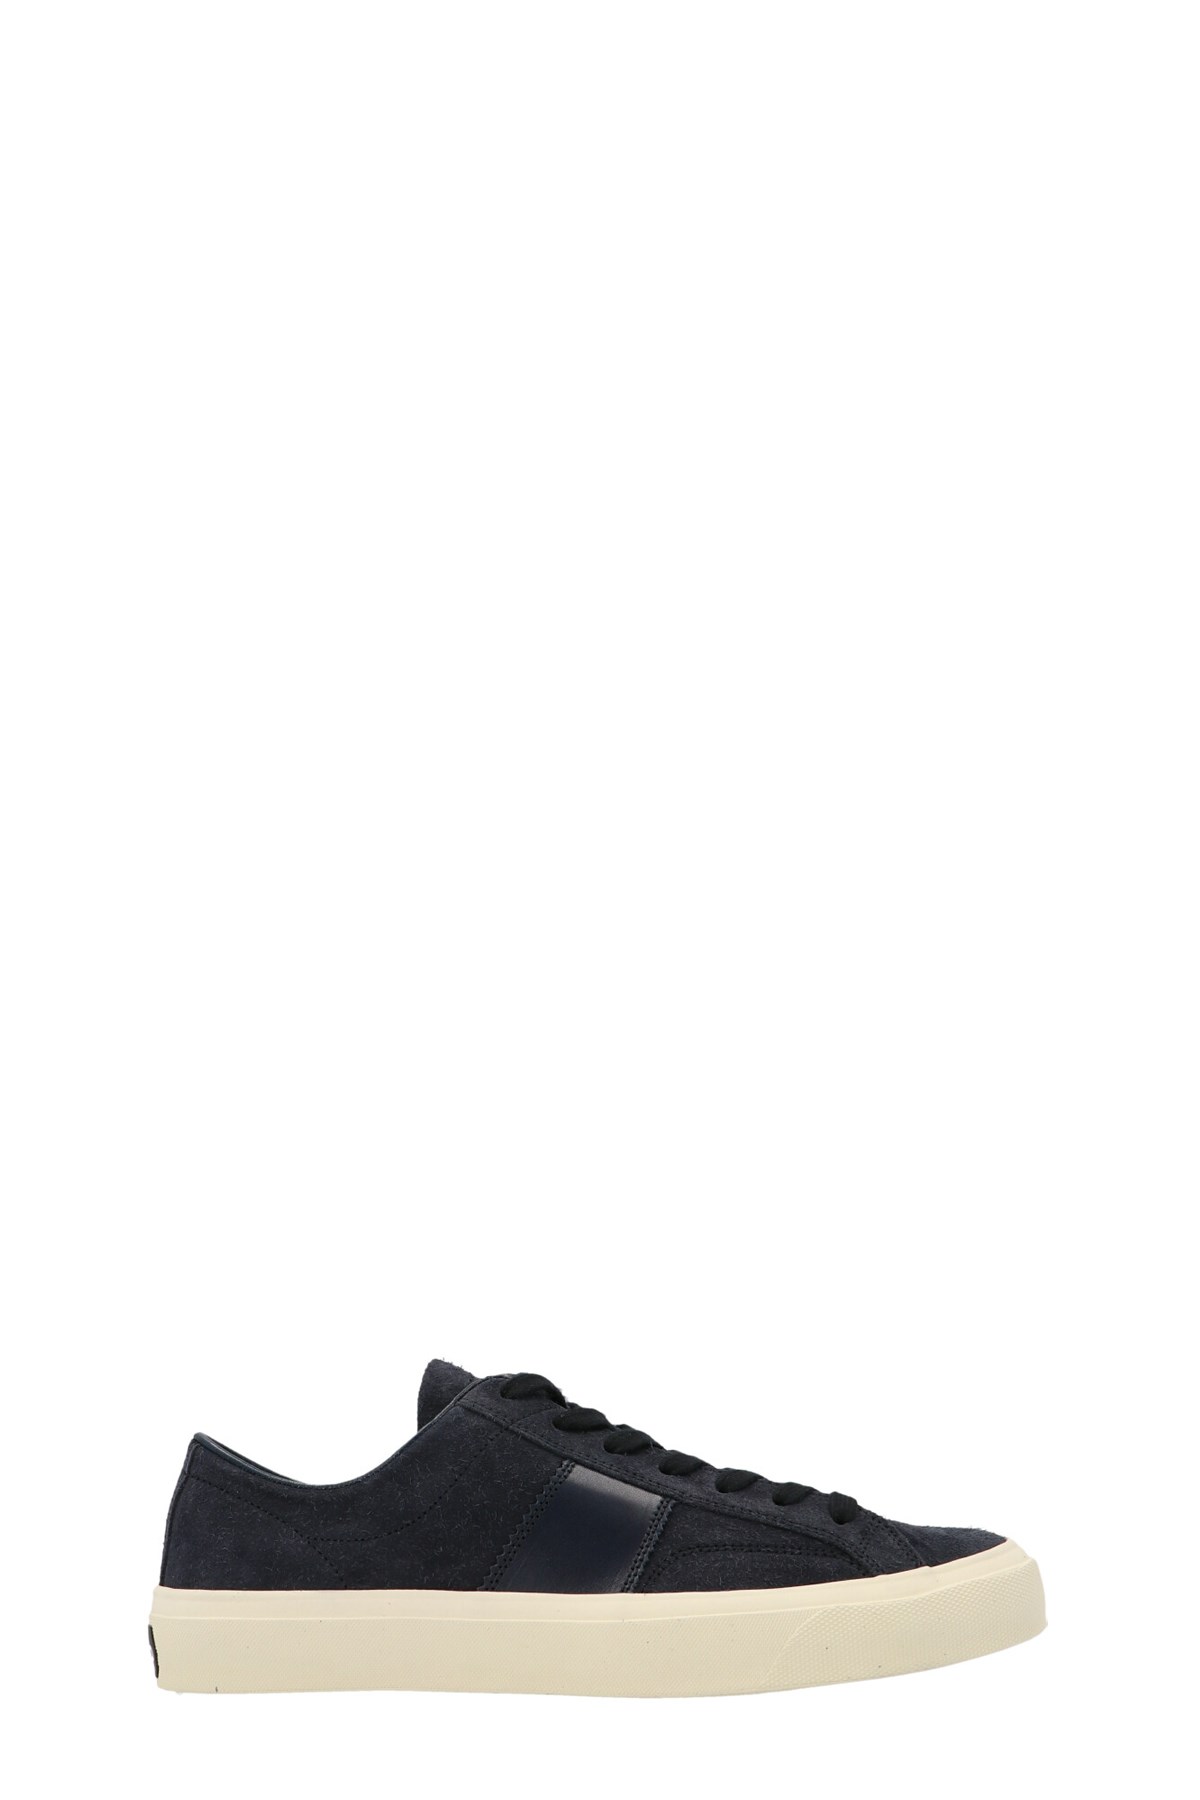 TOM FORD 'Cambridge’ Sneakers